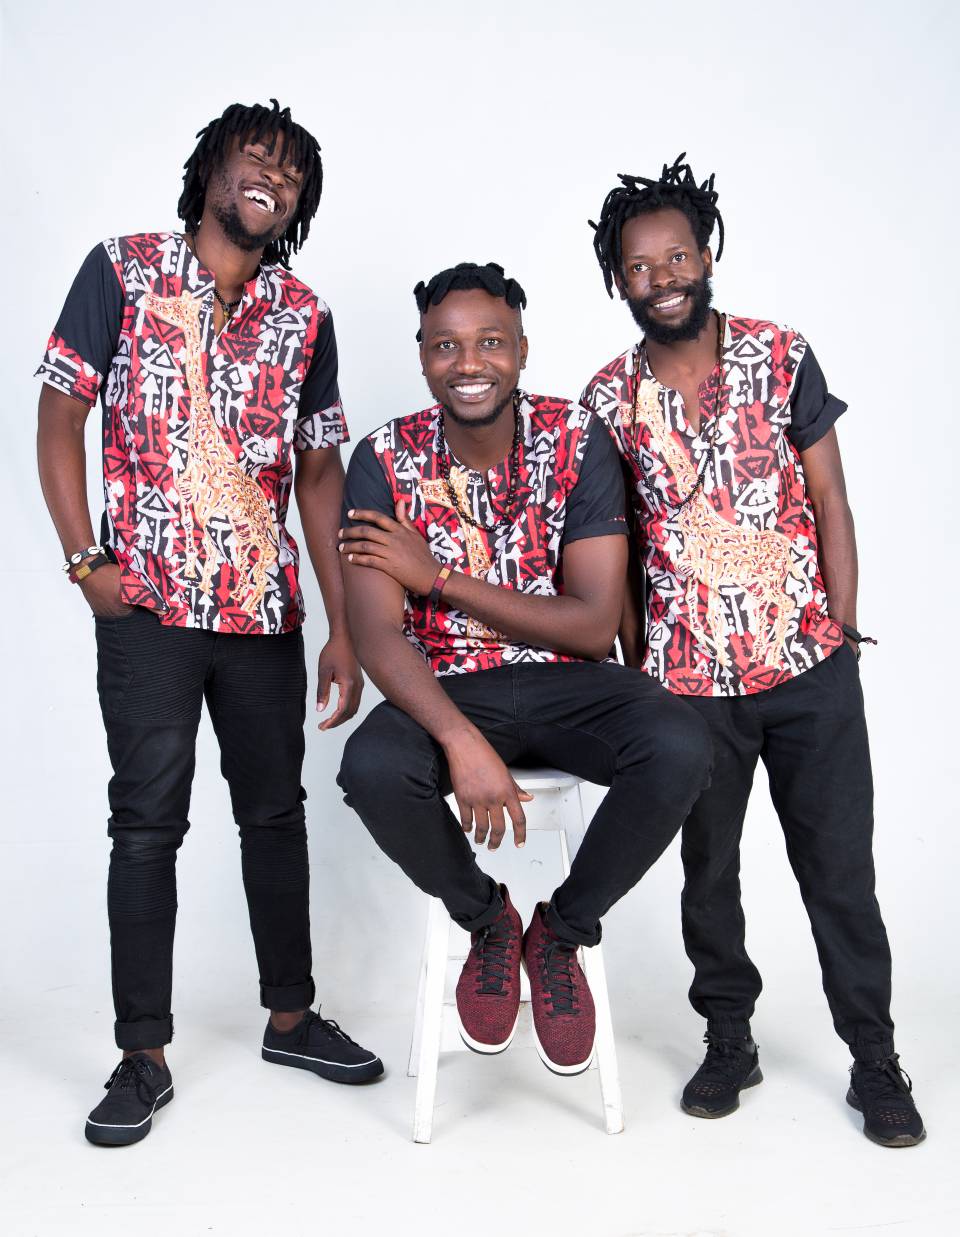 Gwevedzi to sample new album at Theatre in the Park – Spiked.co.zw ...